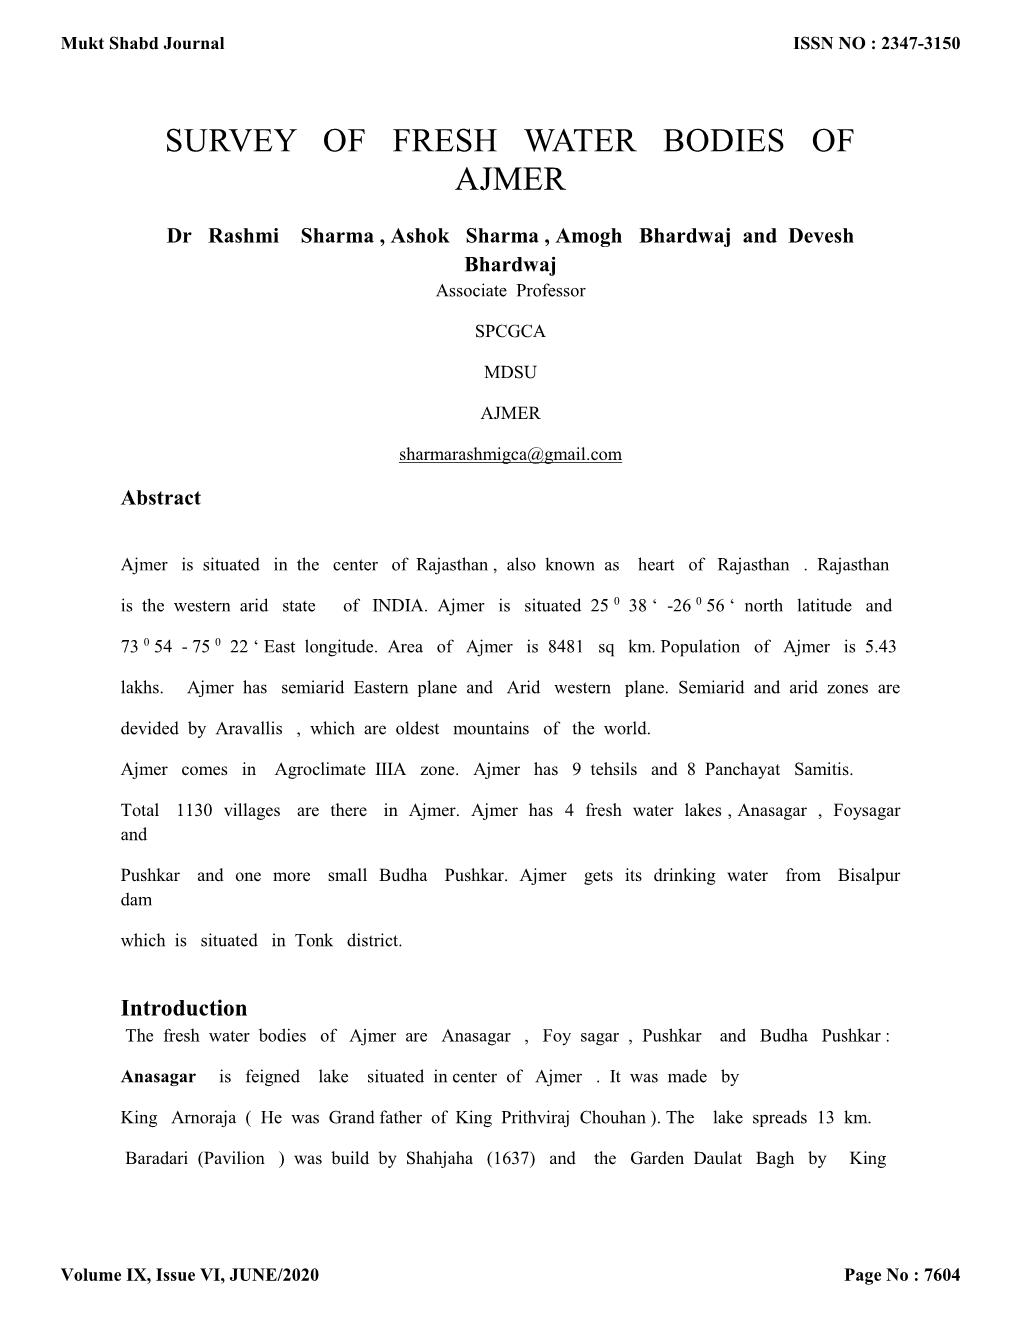 Survey of Fresh Water Bodies of Ajmer